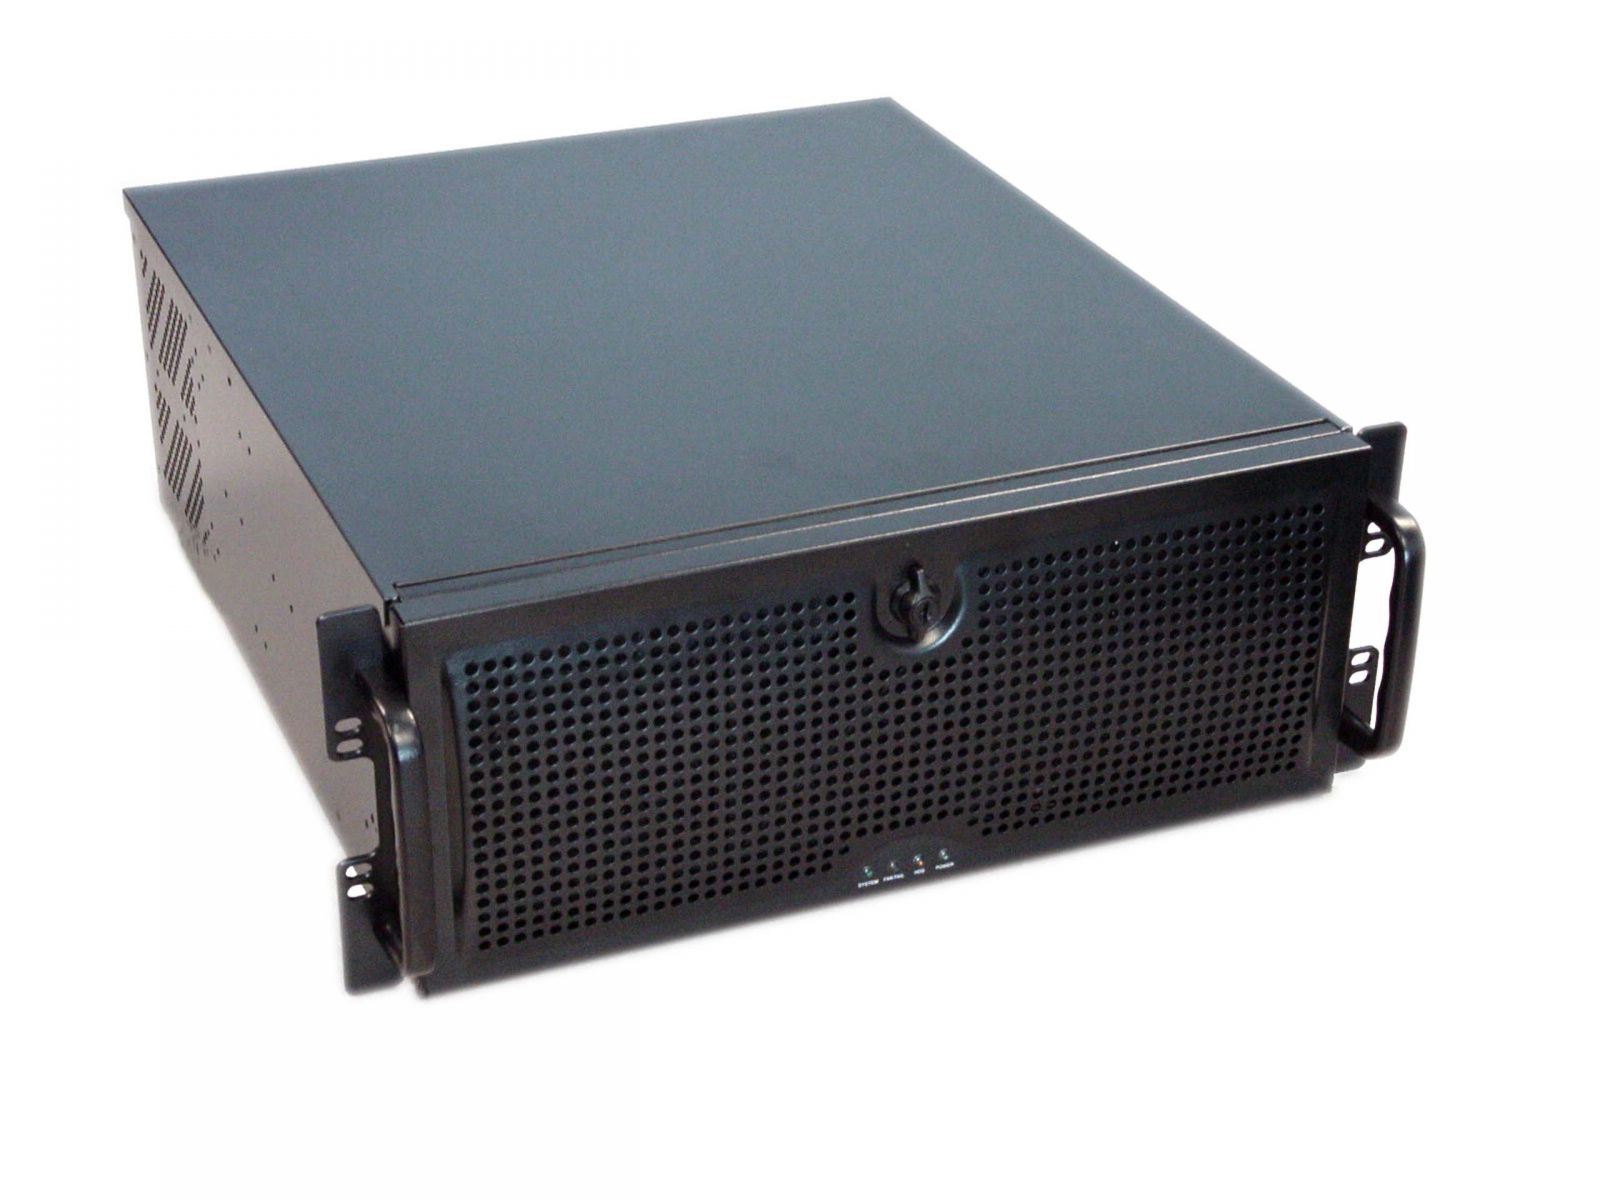 DXE410 PCIe Gen1 Expansion Chassis